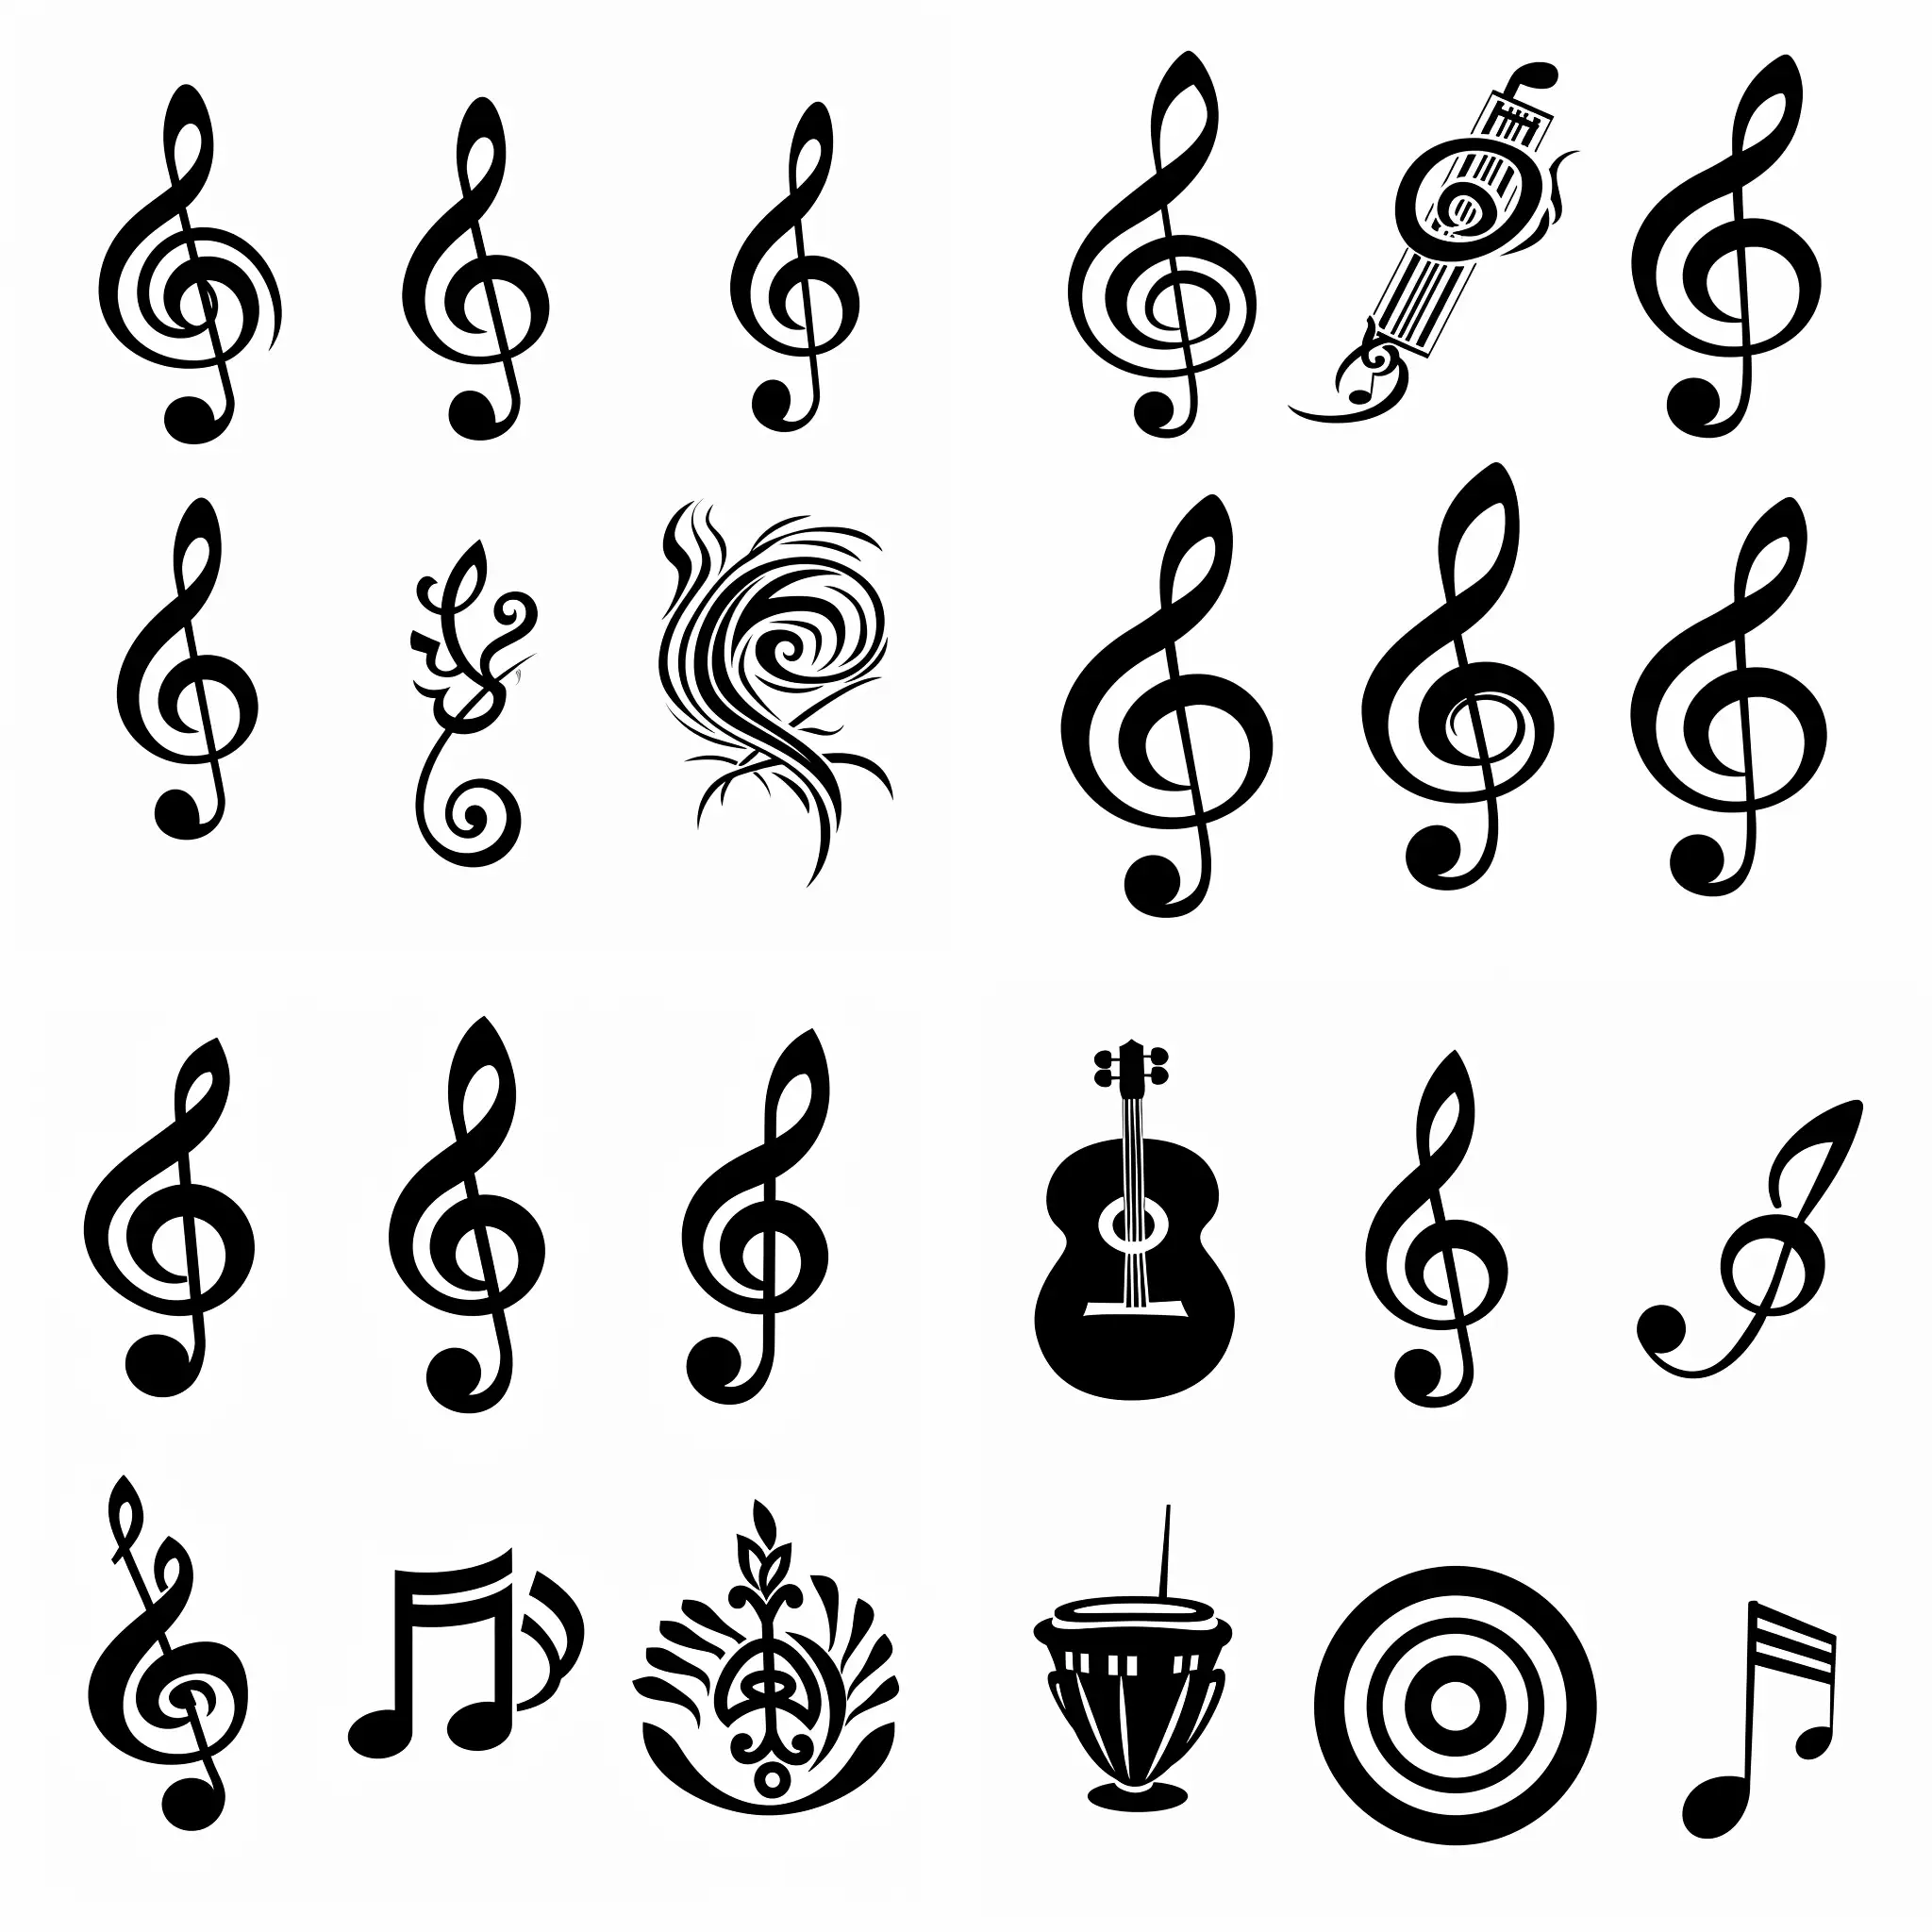 Five variants of music vector symbols, color black, on a white background